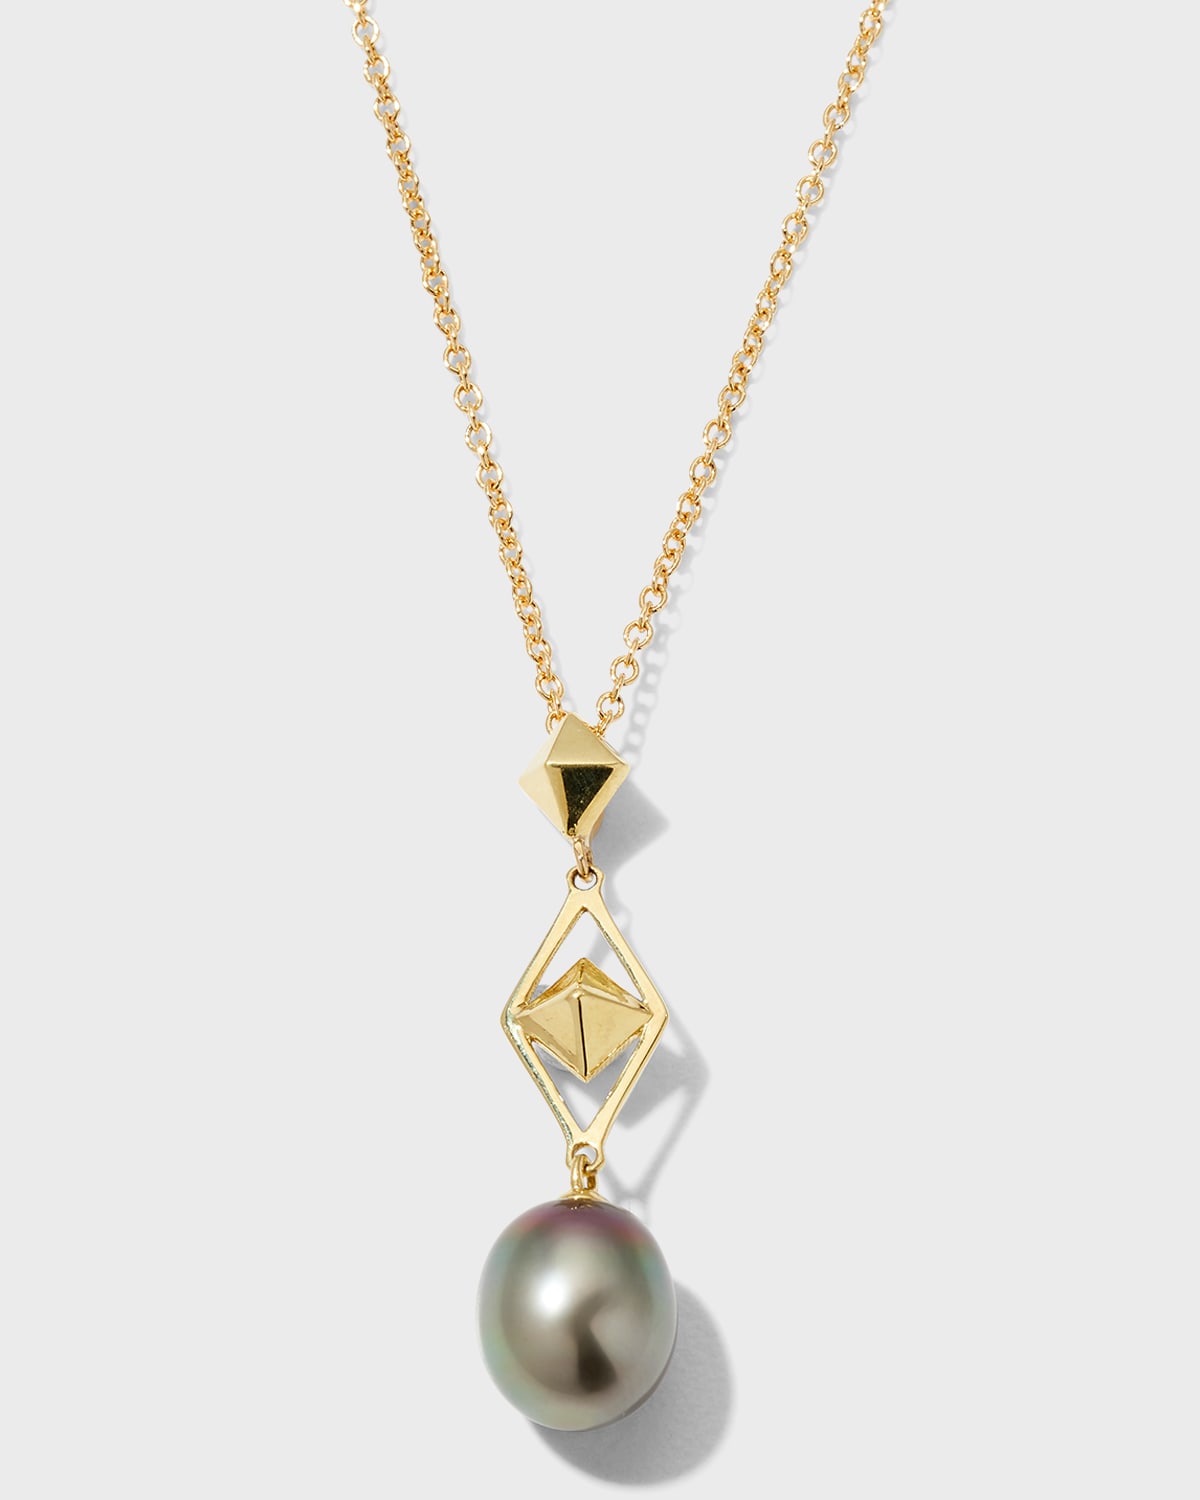 Yellow Gold Tahitian Pearl Drop Necklace, 10mm